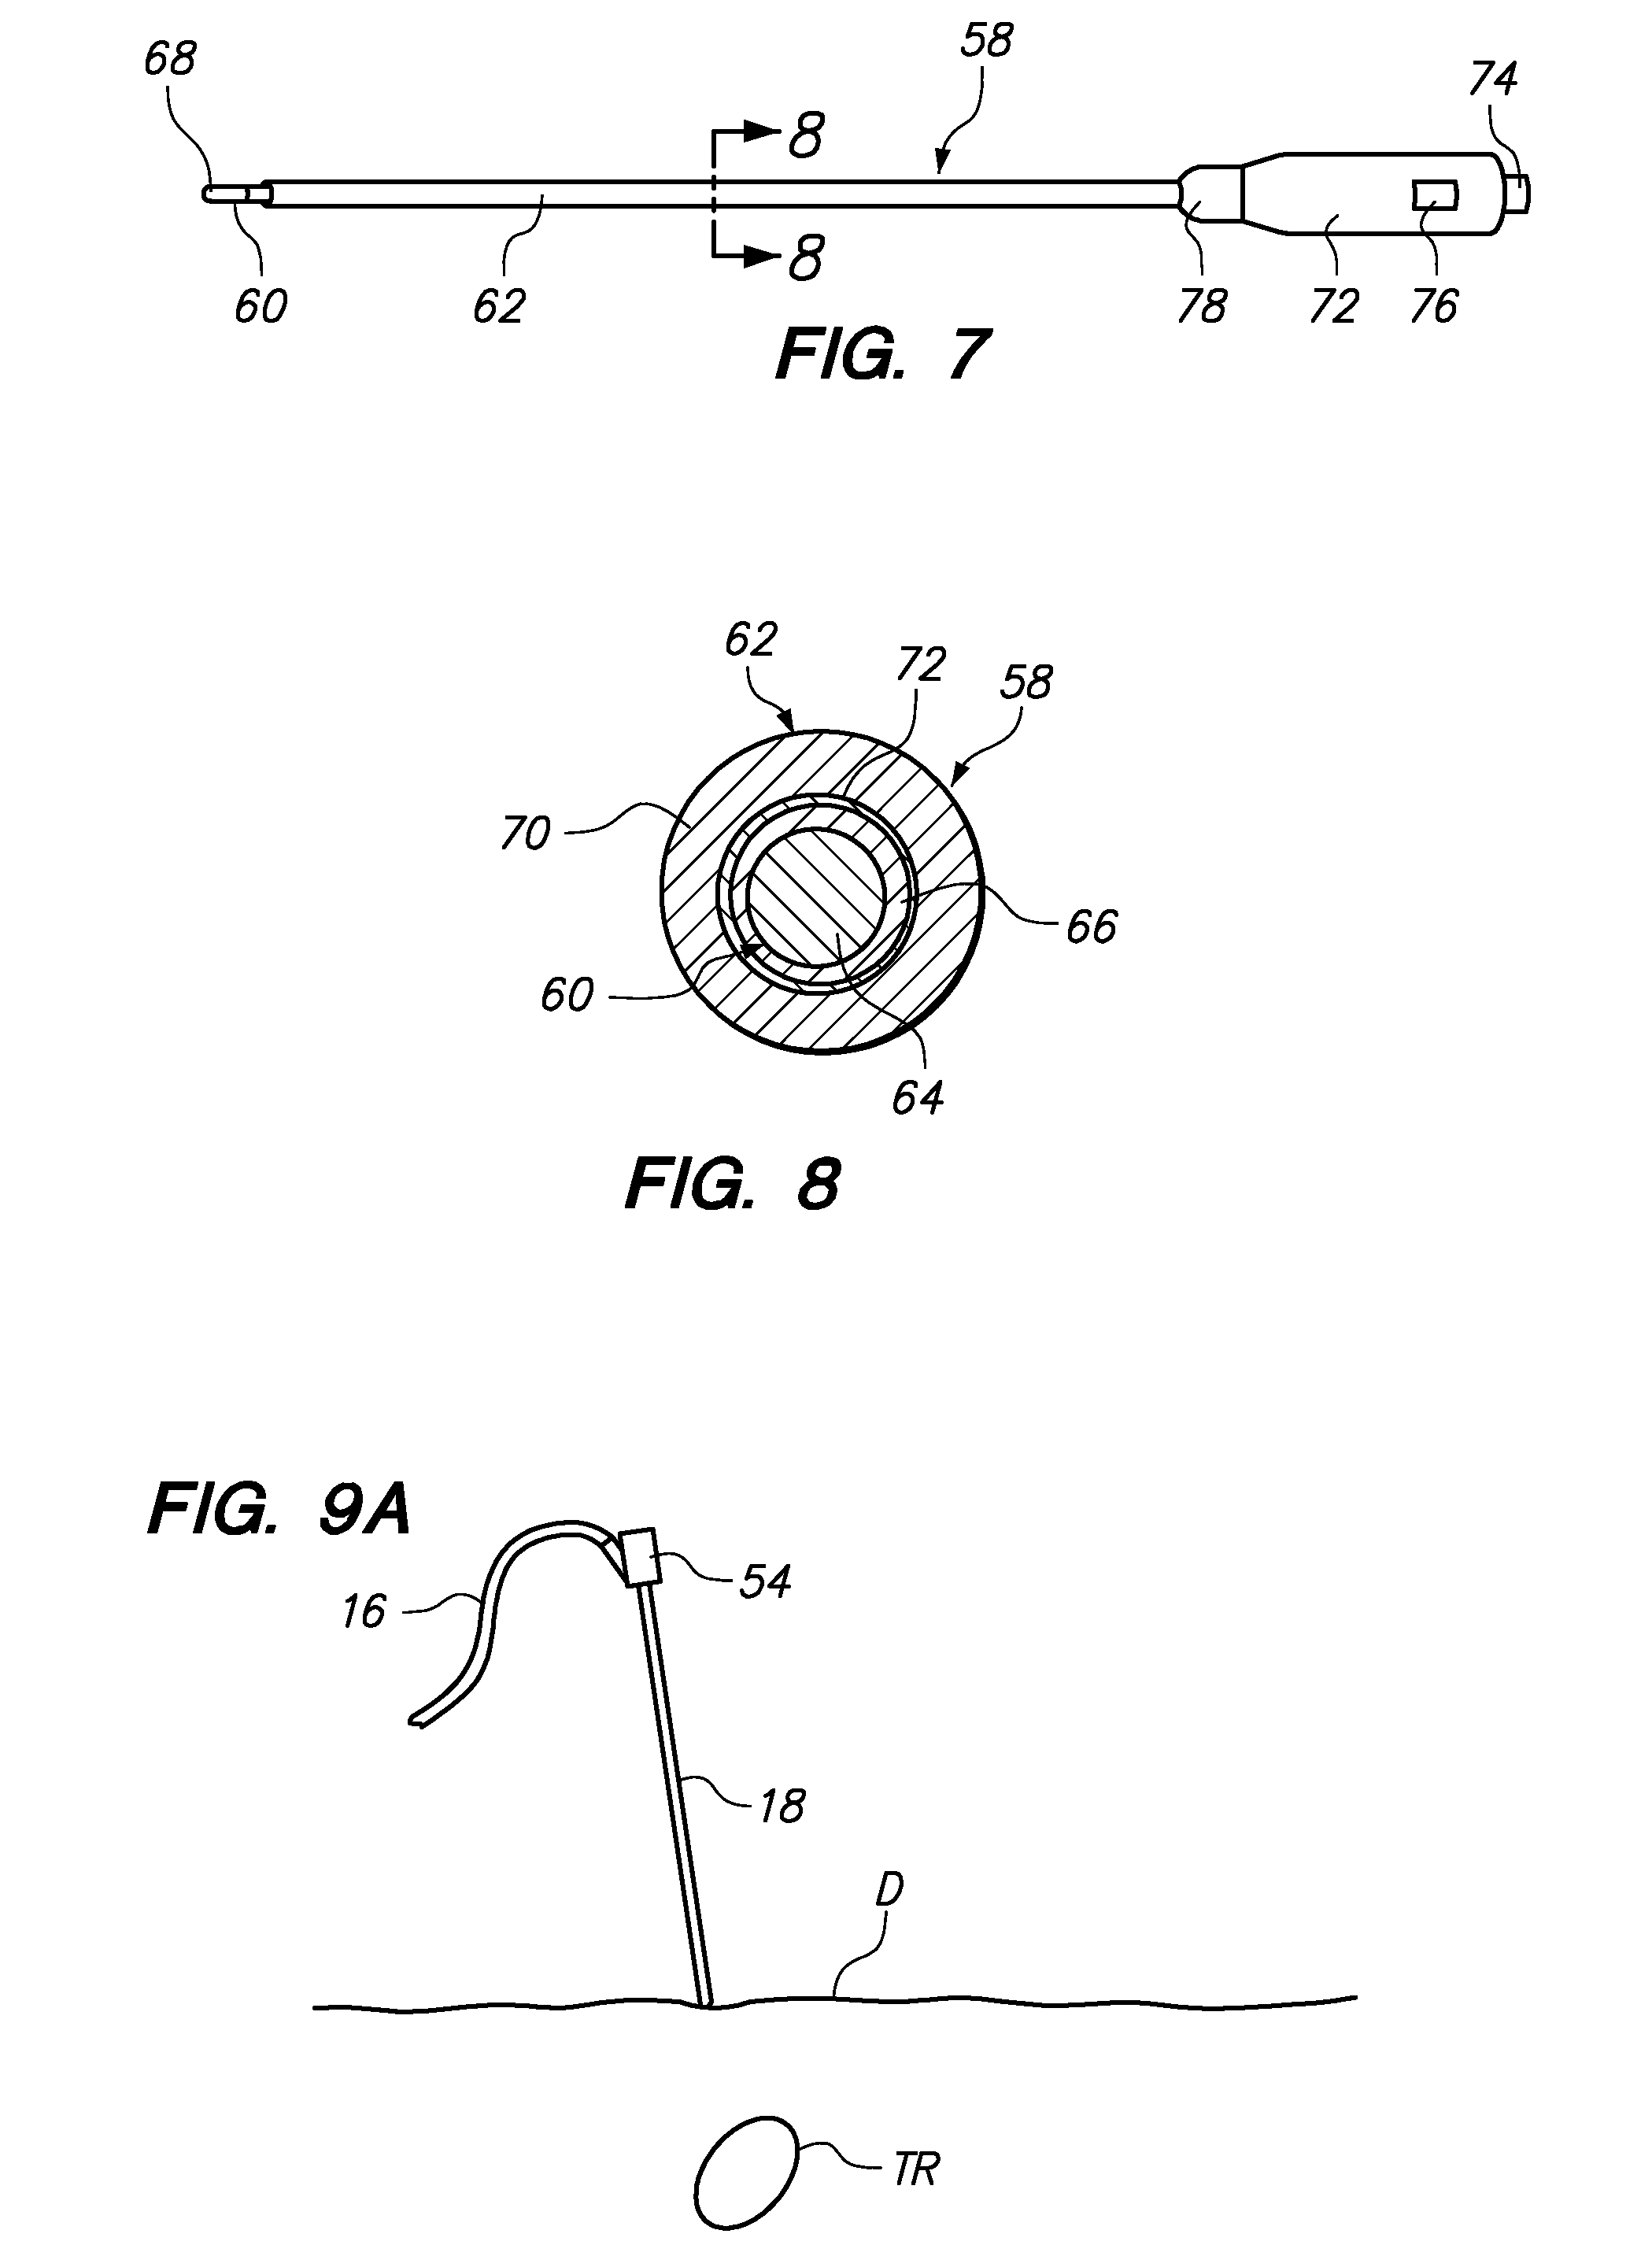 Methods and apparatus for percutaneous patient access and subcutaneous tissue tunneling